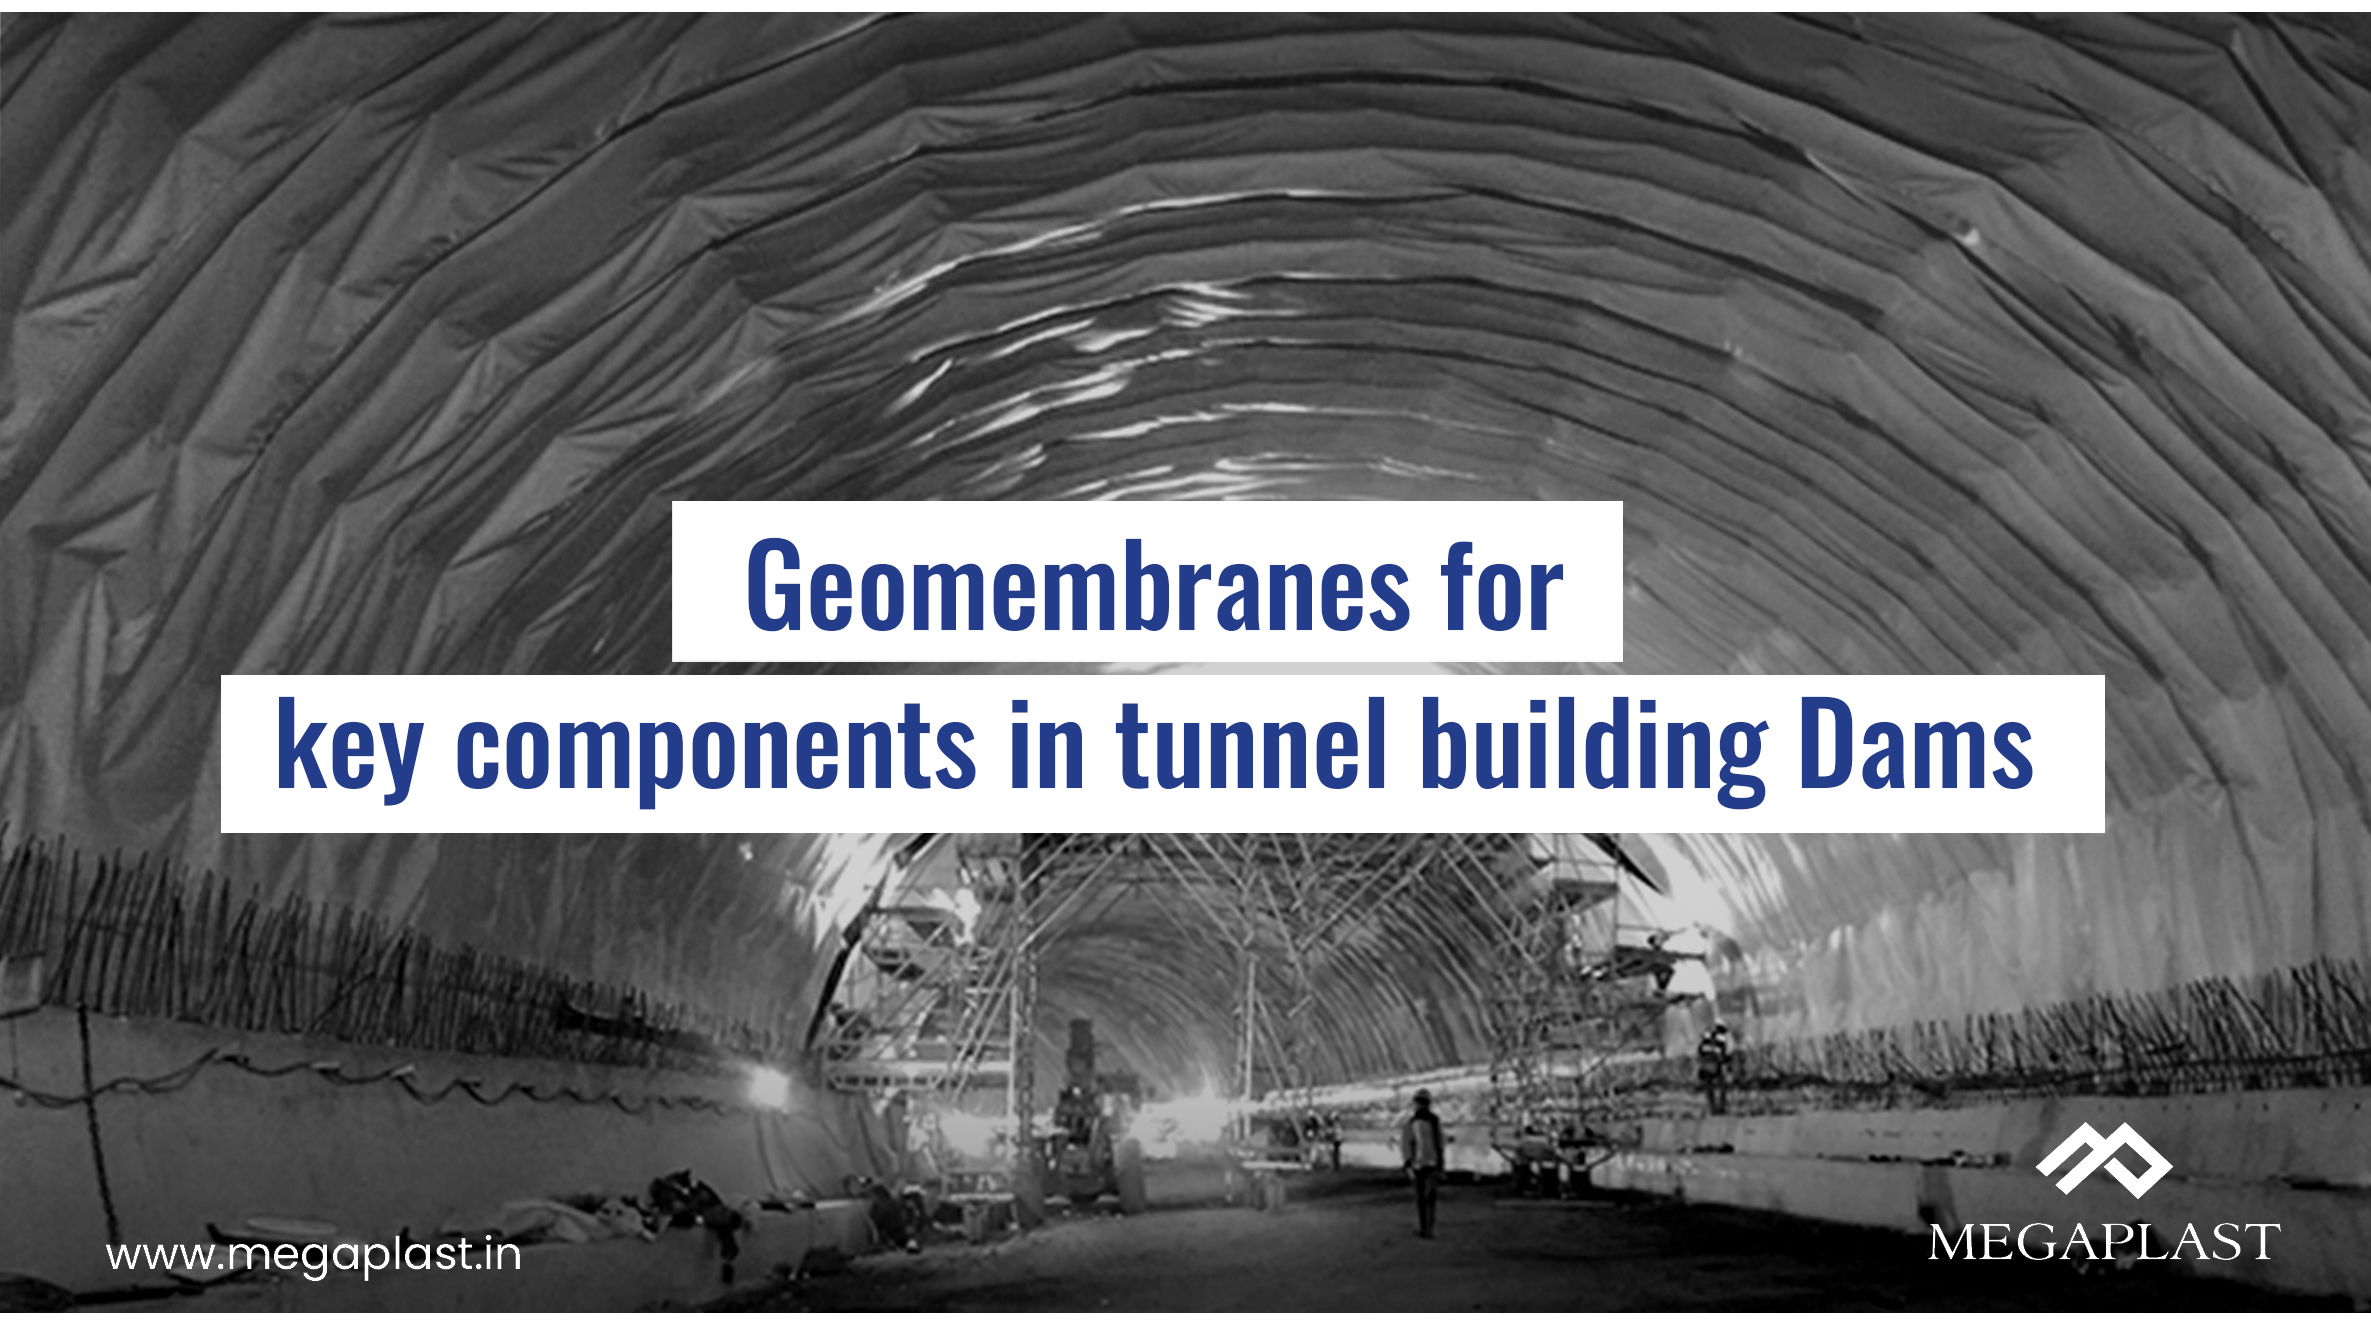 Geomembranes are key components in tunnel building